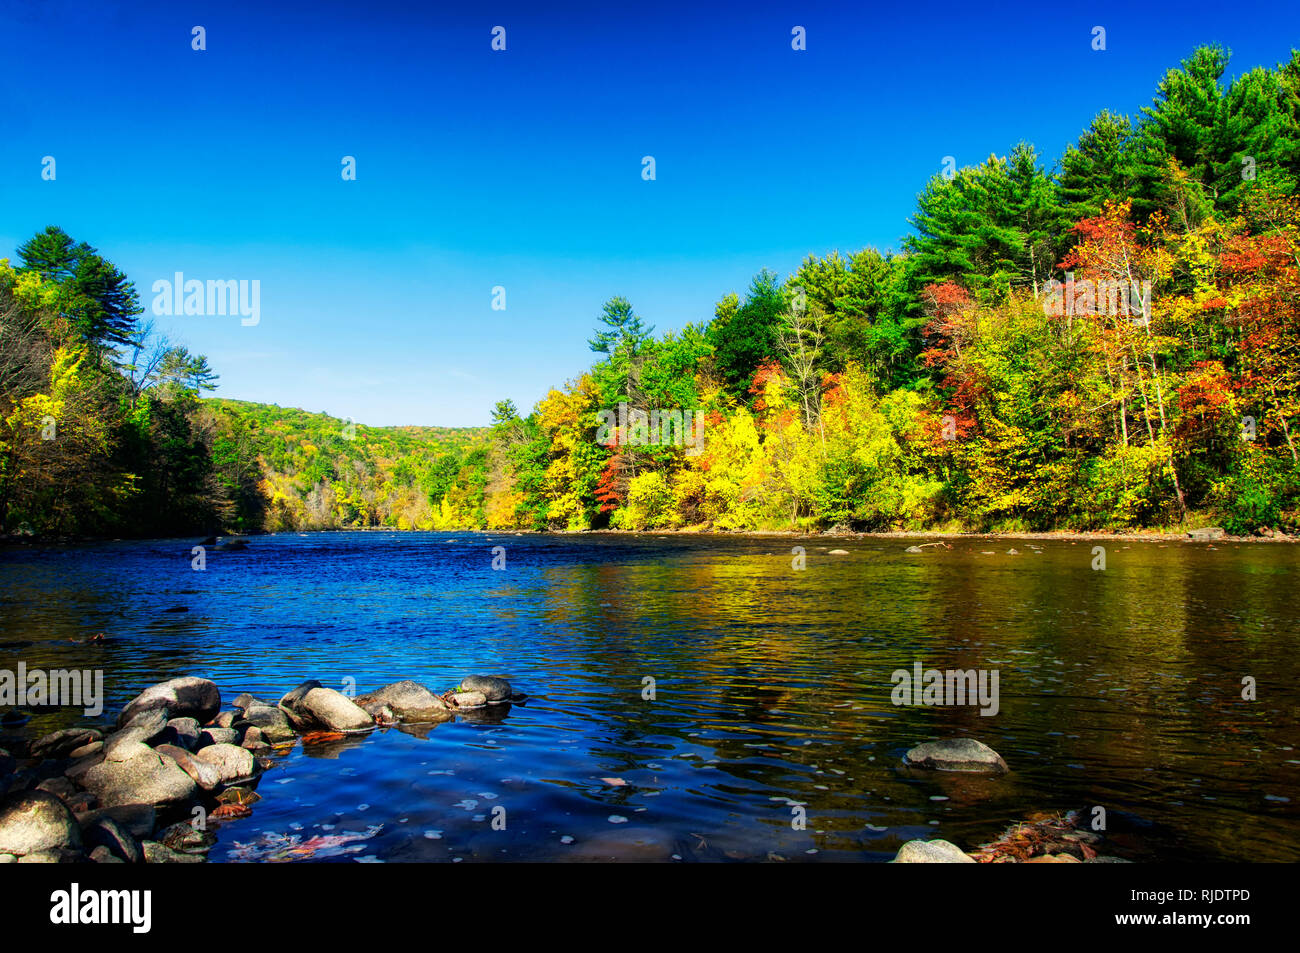 The Housatonic River and fall foliage of litchfield county in autumn in the town of Cornwall Bridge Connecticut on a sunny blue sky day. Stock Photo